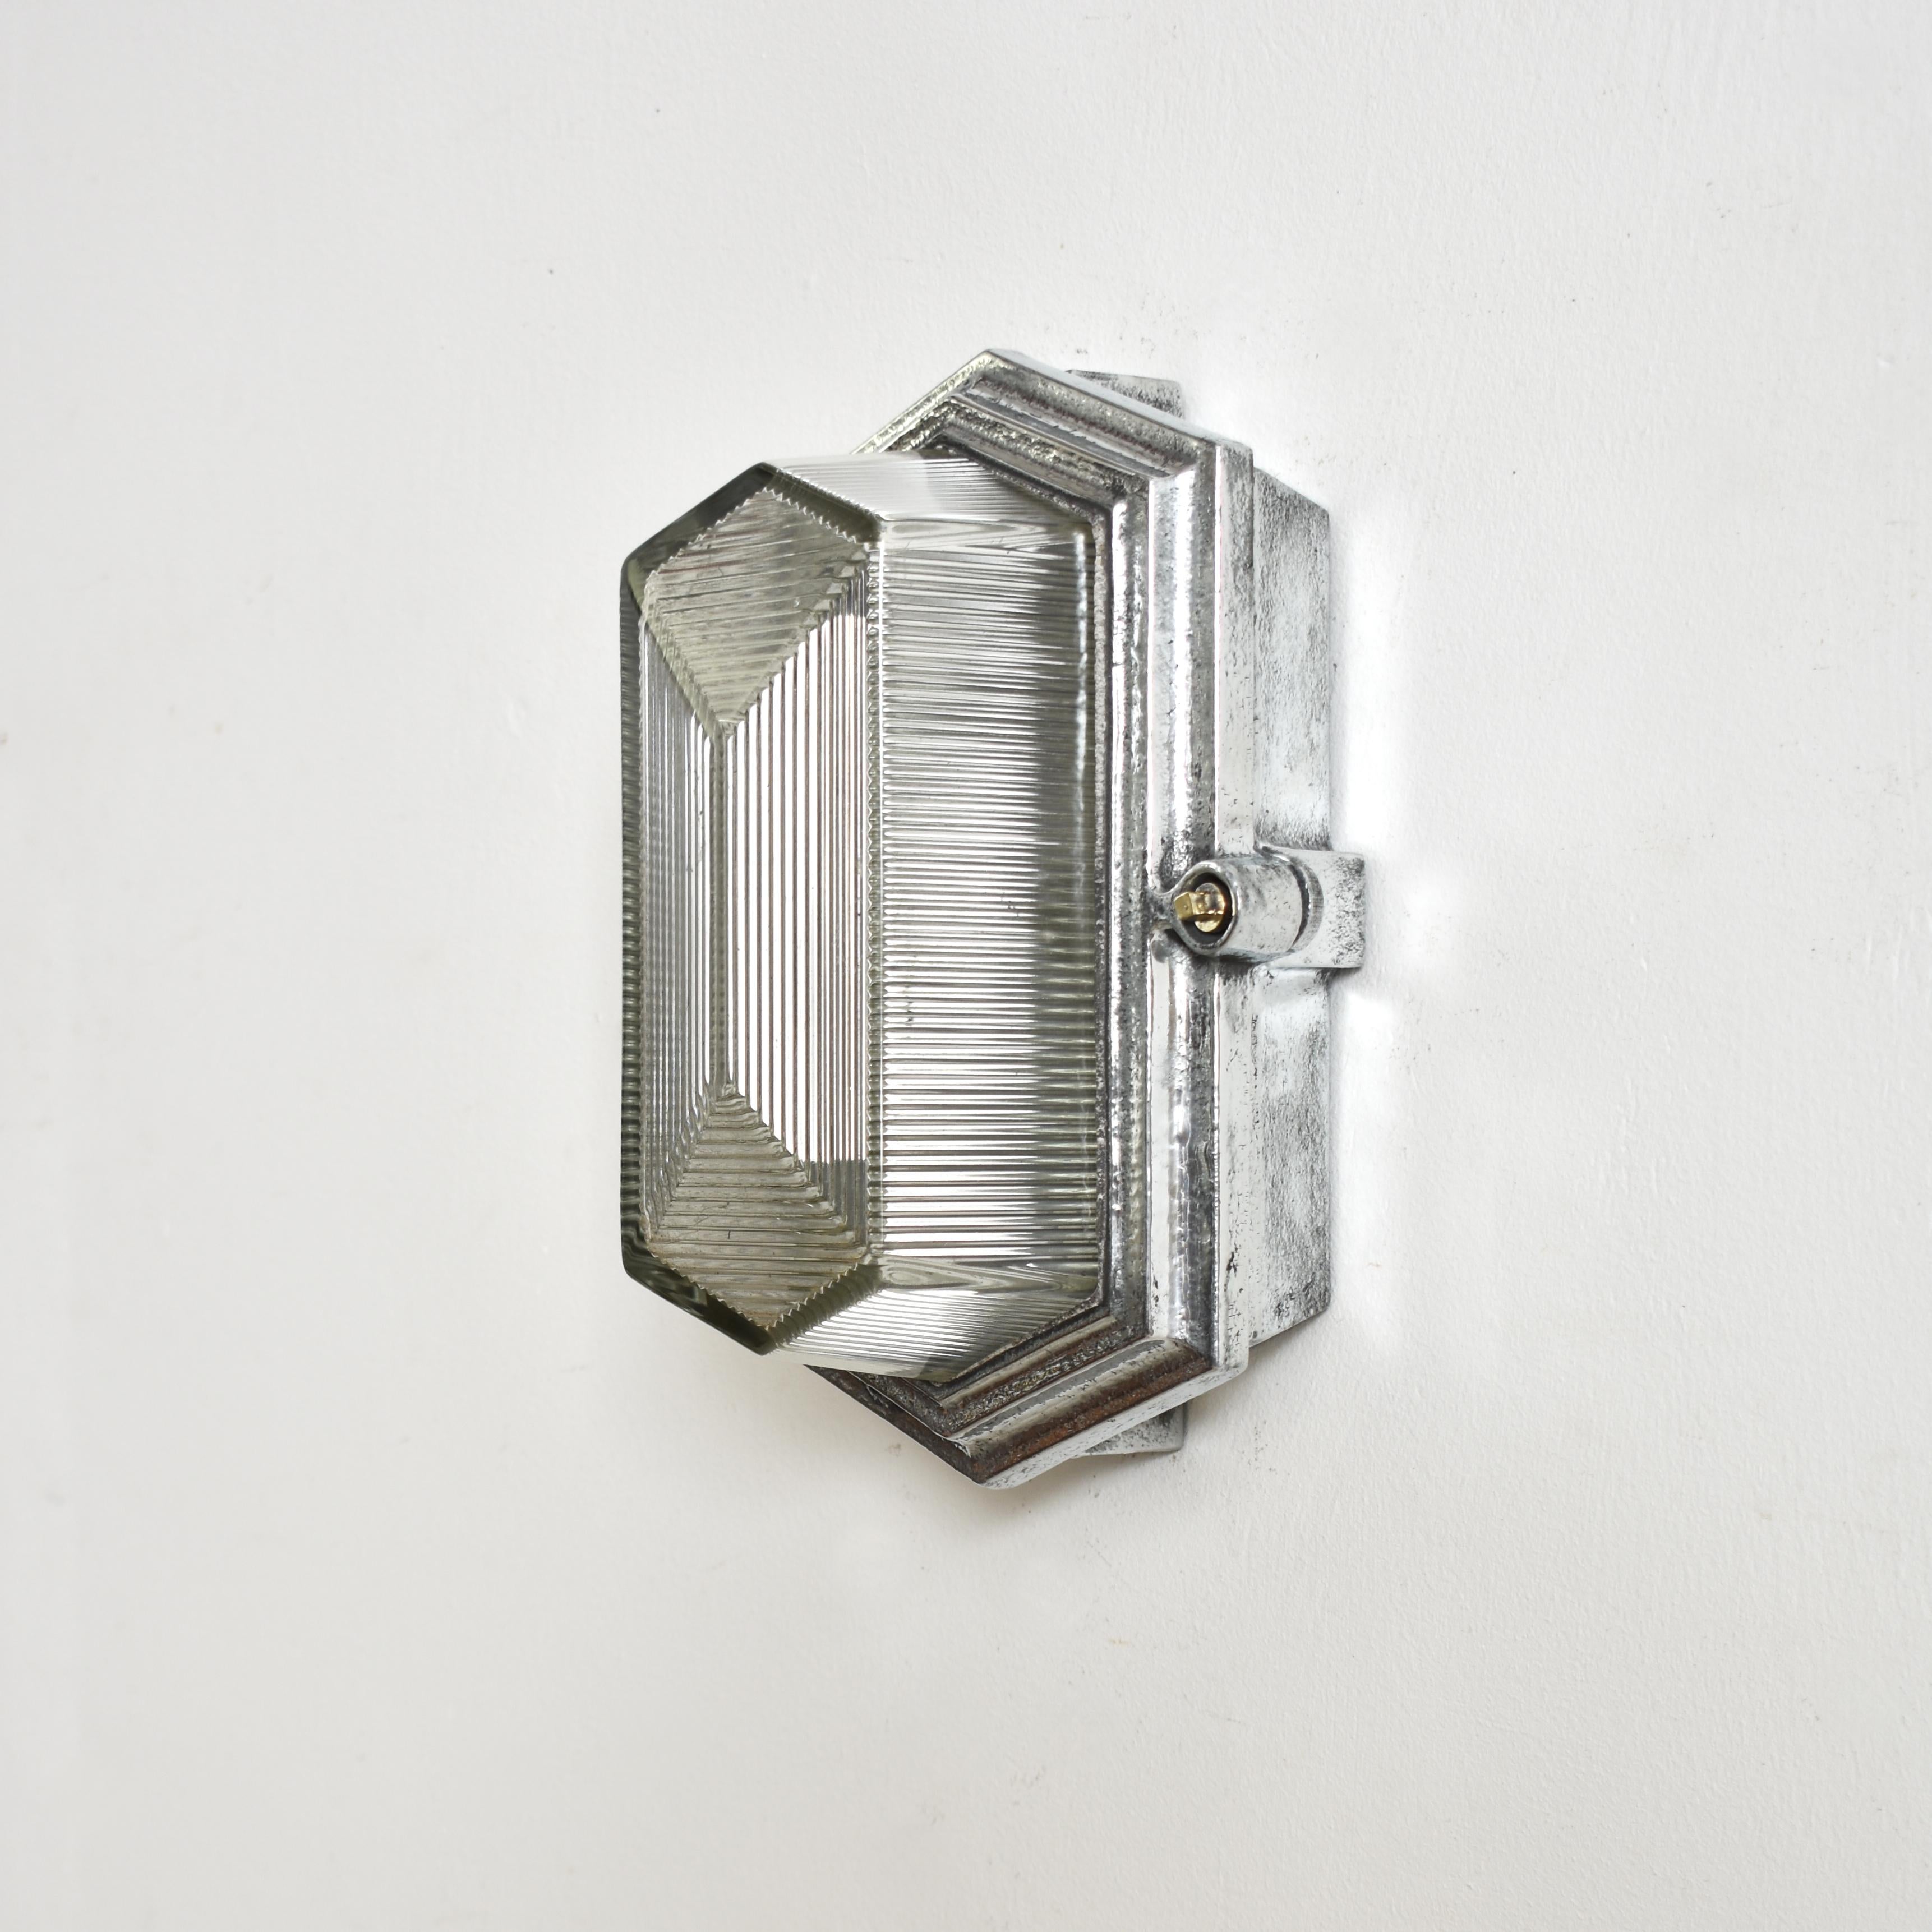 Antique Maxlume Industrial Bulkhead Polished Bathroom Wall Light

An original cast steel bulkhead light manufactured by ‘Maxlume’.The light was originally used in a paint factory and consists of a linear prismatic flameproof glass lens and